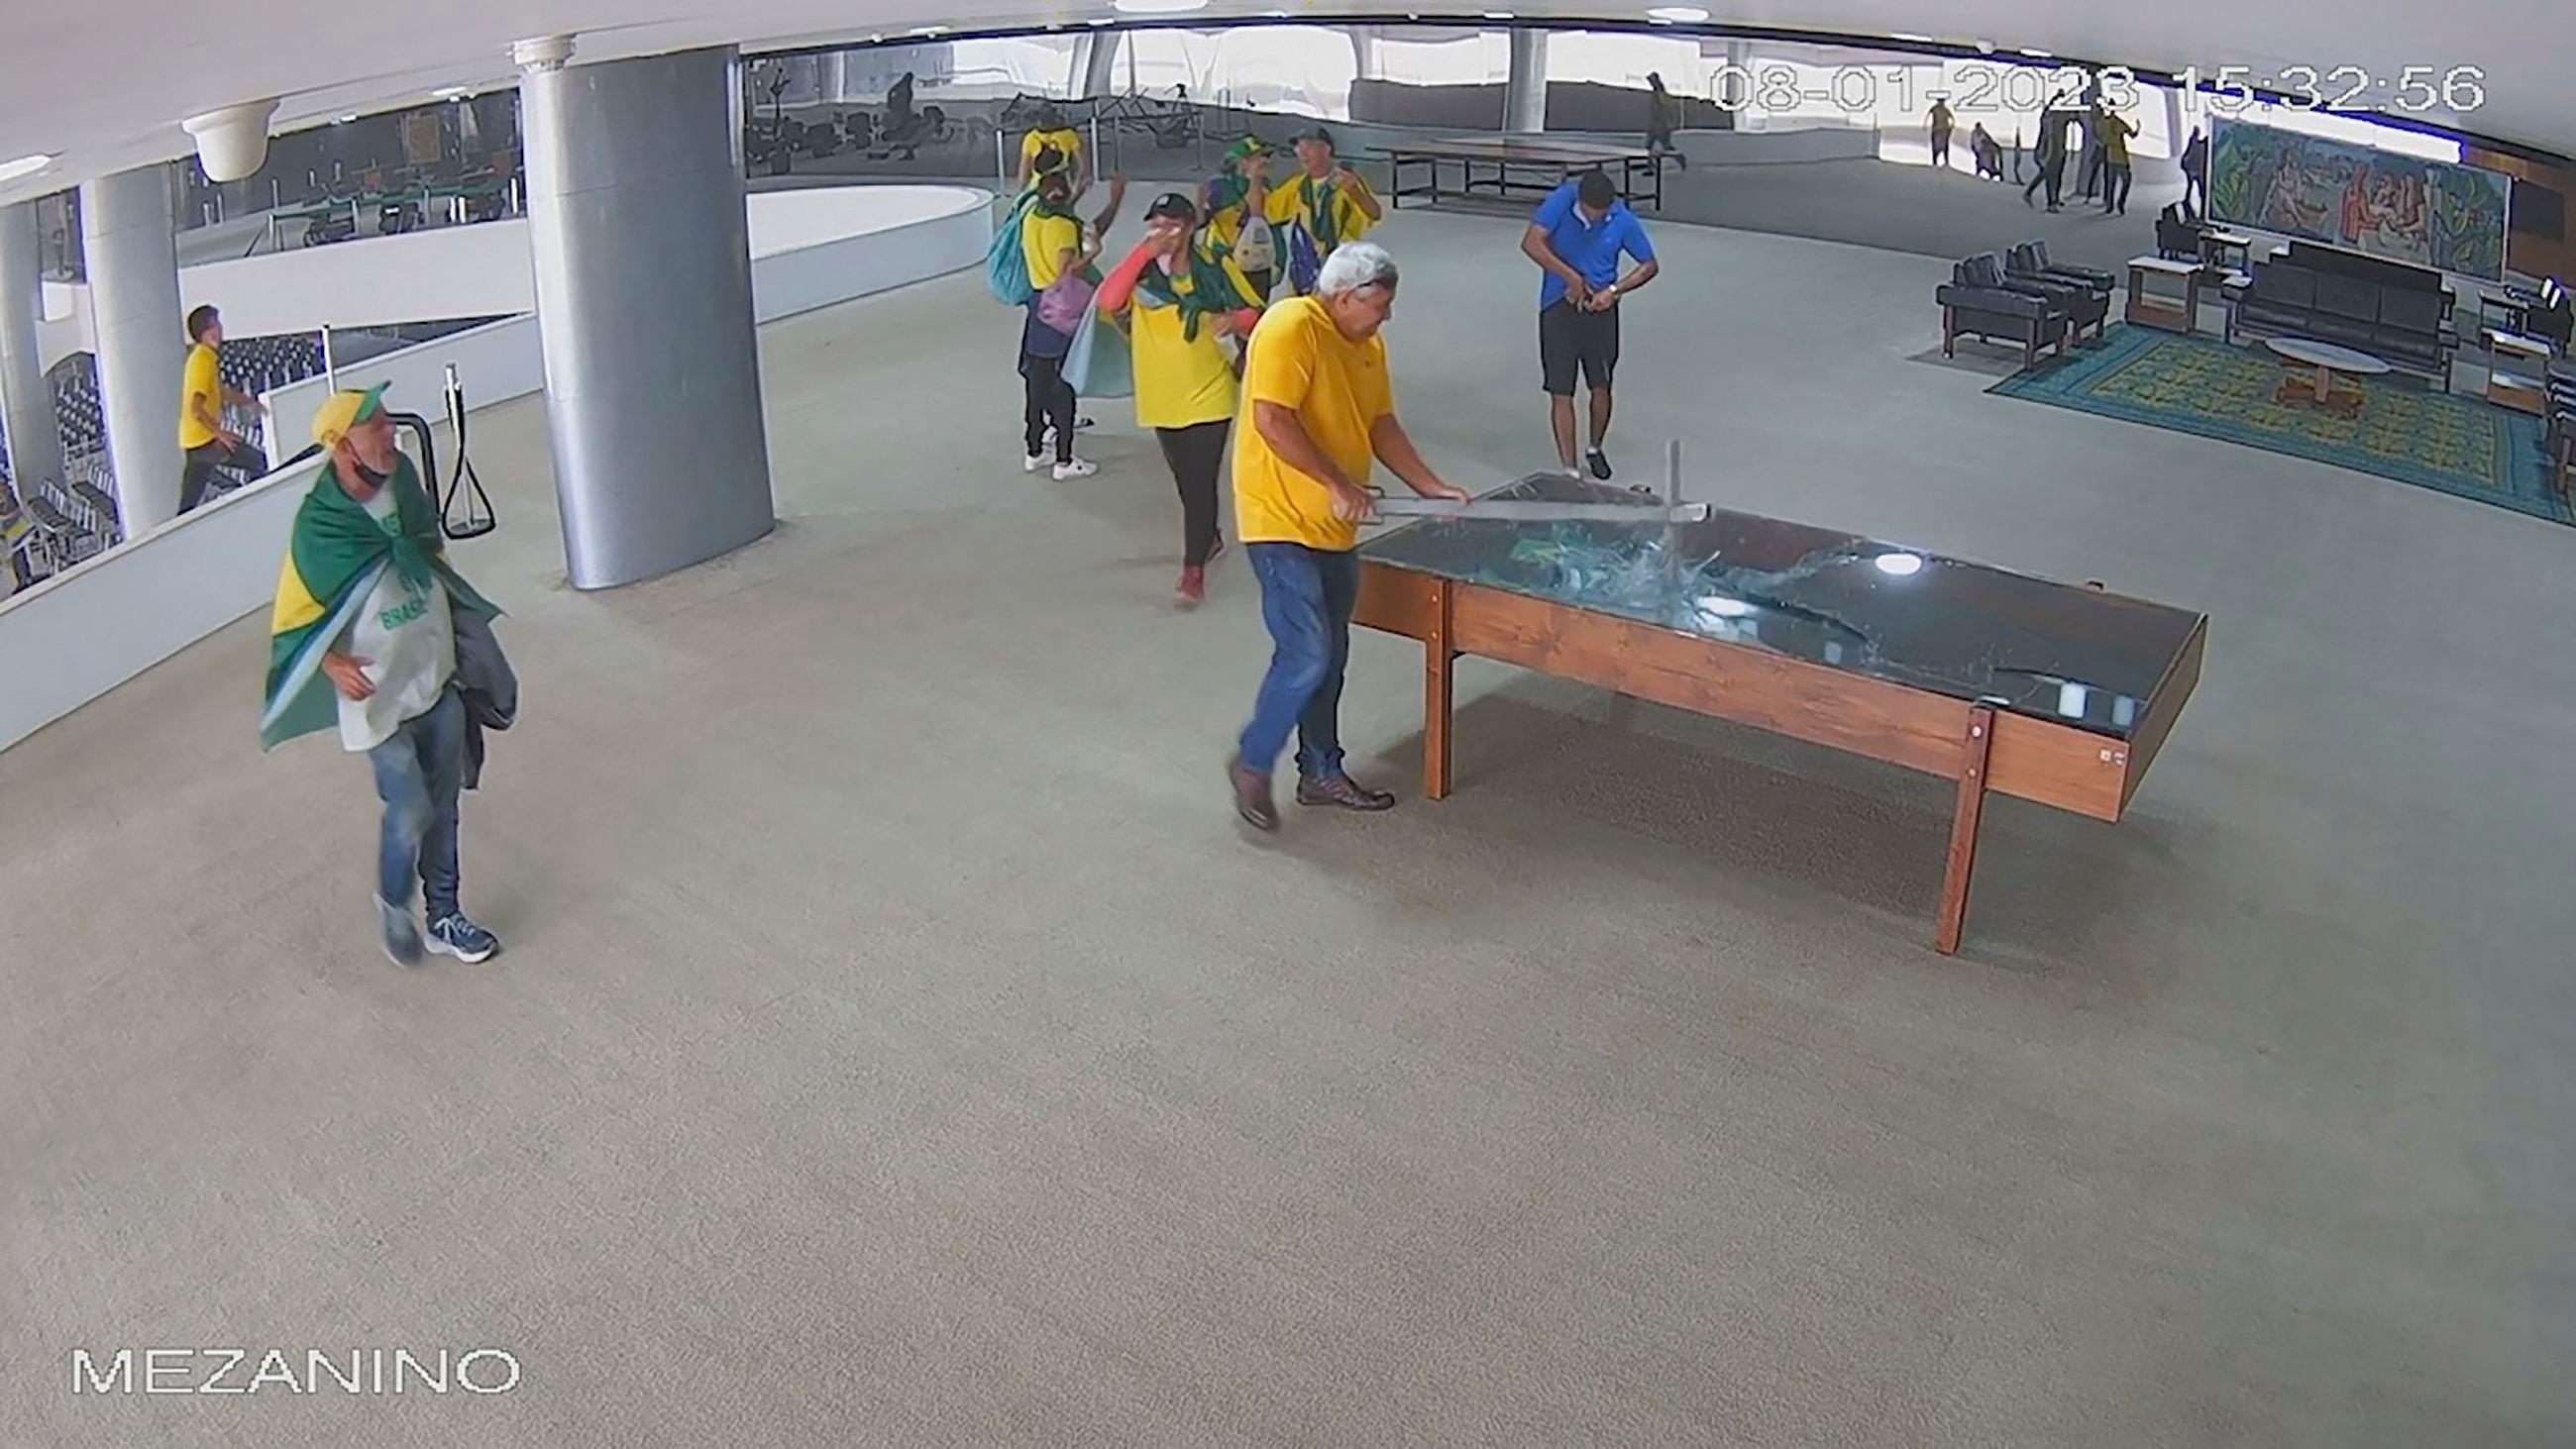 Frame capture from the handout of a CCTV video of the Planalto Palace published by the Presidency of Brazil.